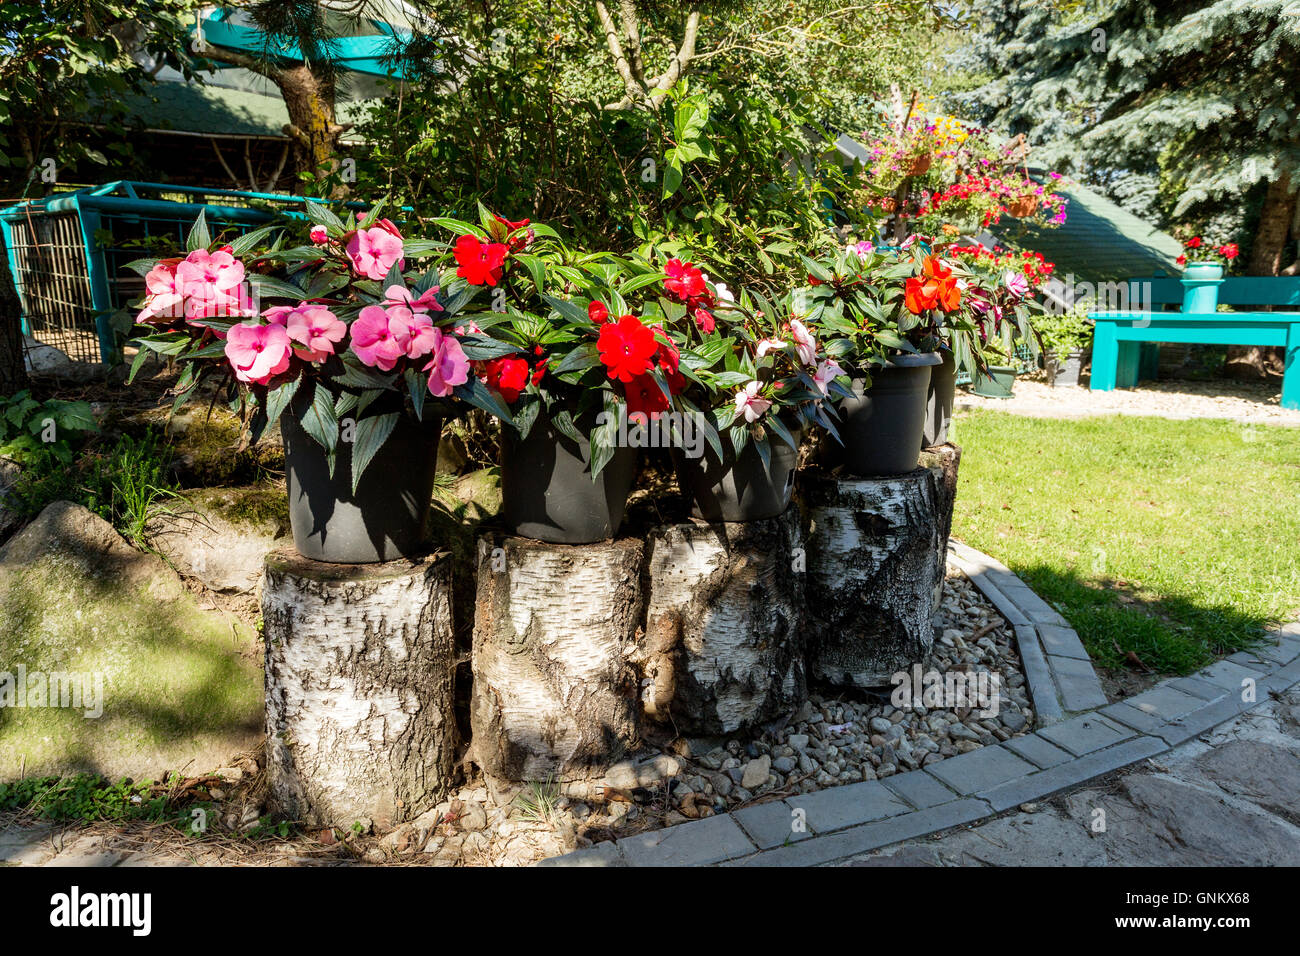 Red New Guinea impatiens flowers in pots on birch chunk in summer garden in morning sun with shaddows Stock Photo